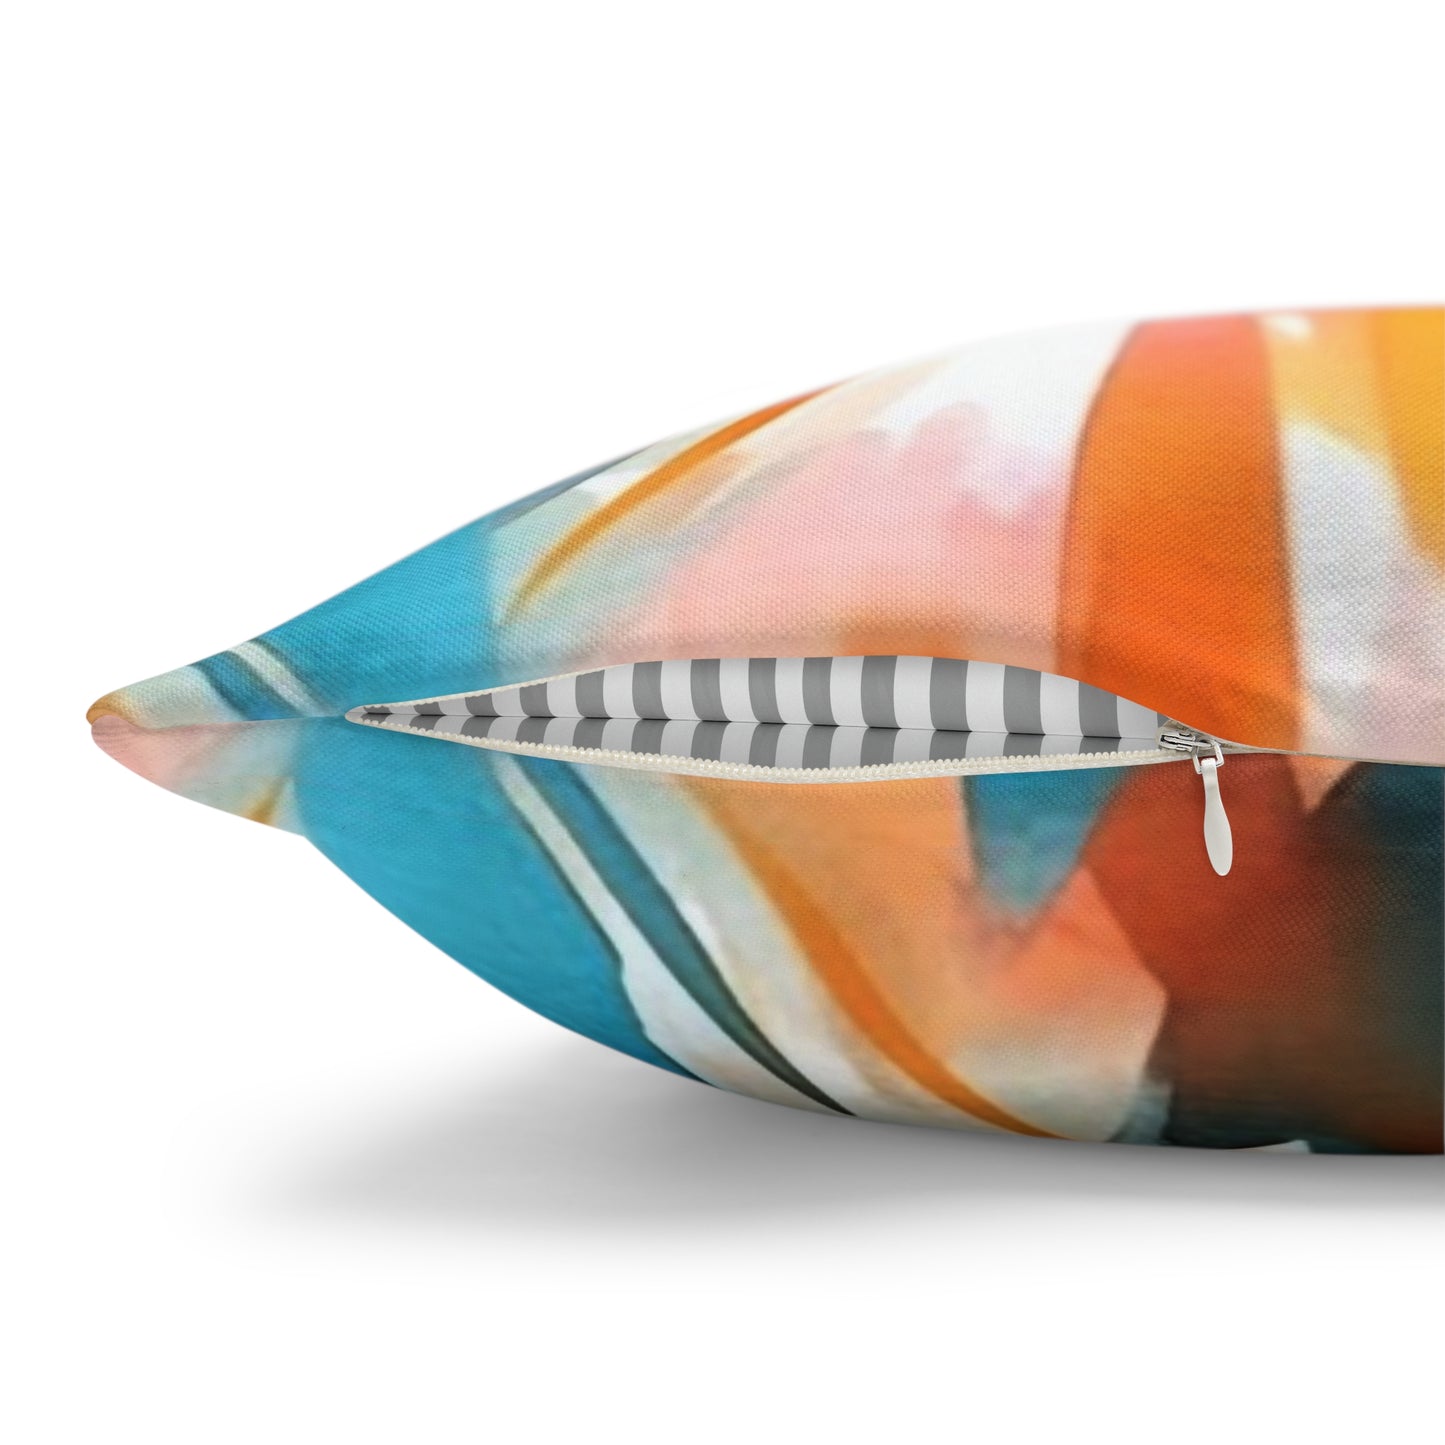 Boho Abstract Floral Throw Pillow Cover (05)